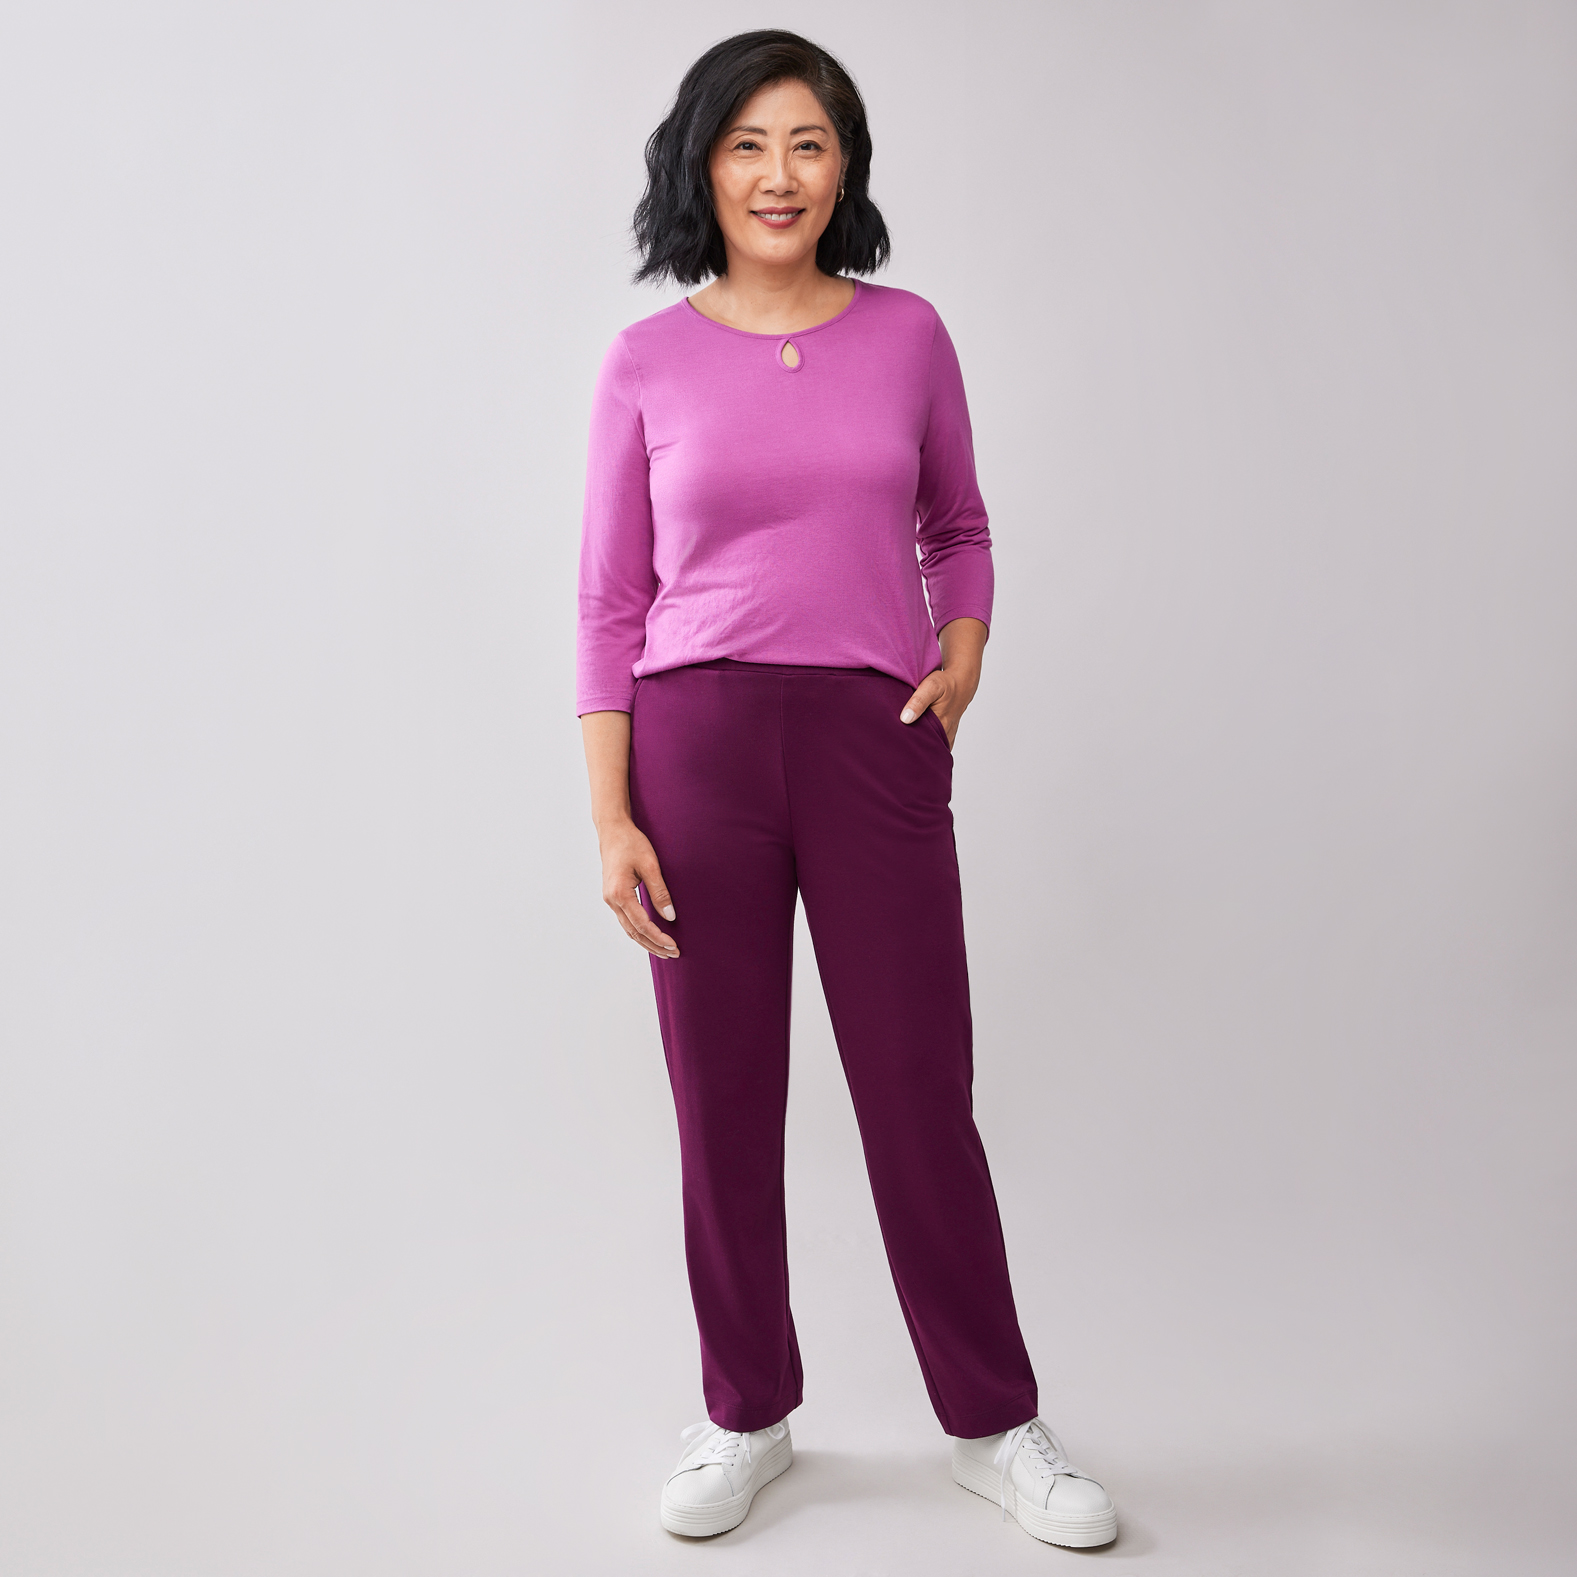 Pull On Knit Pant